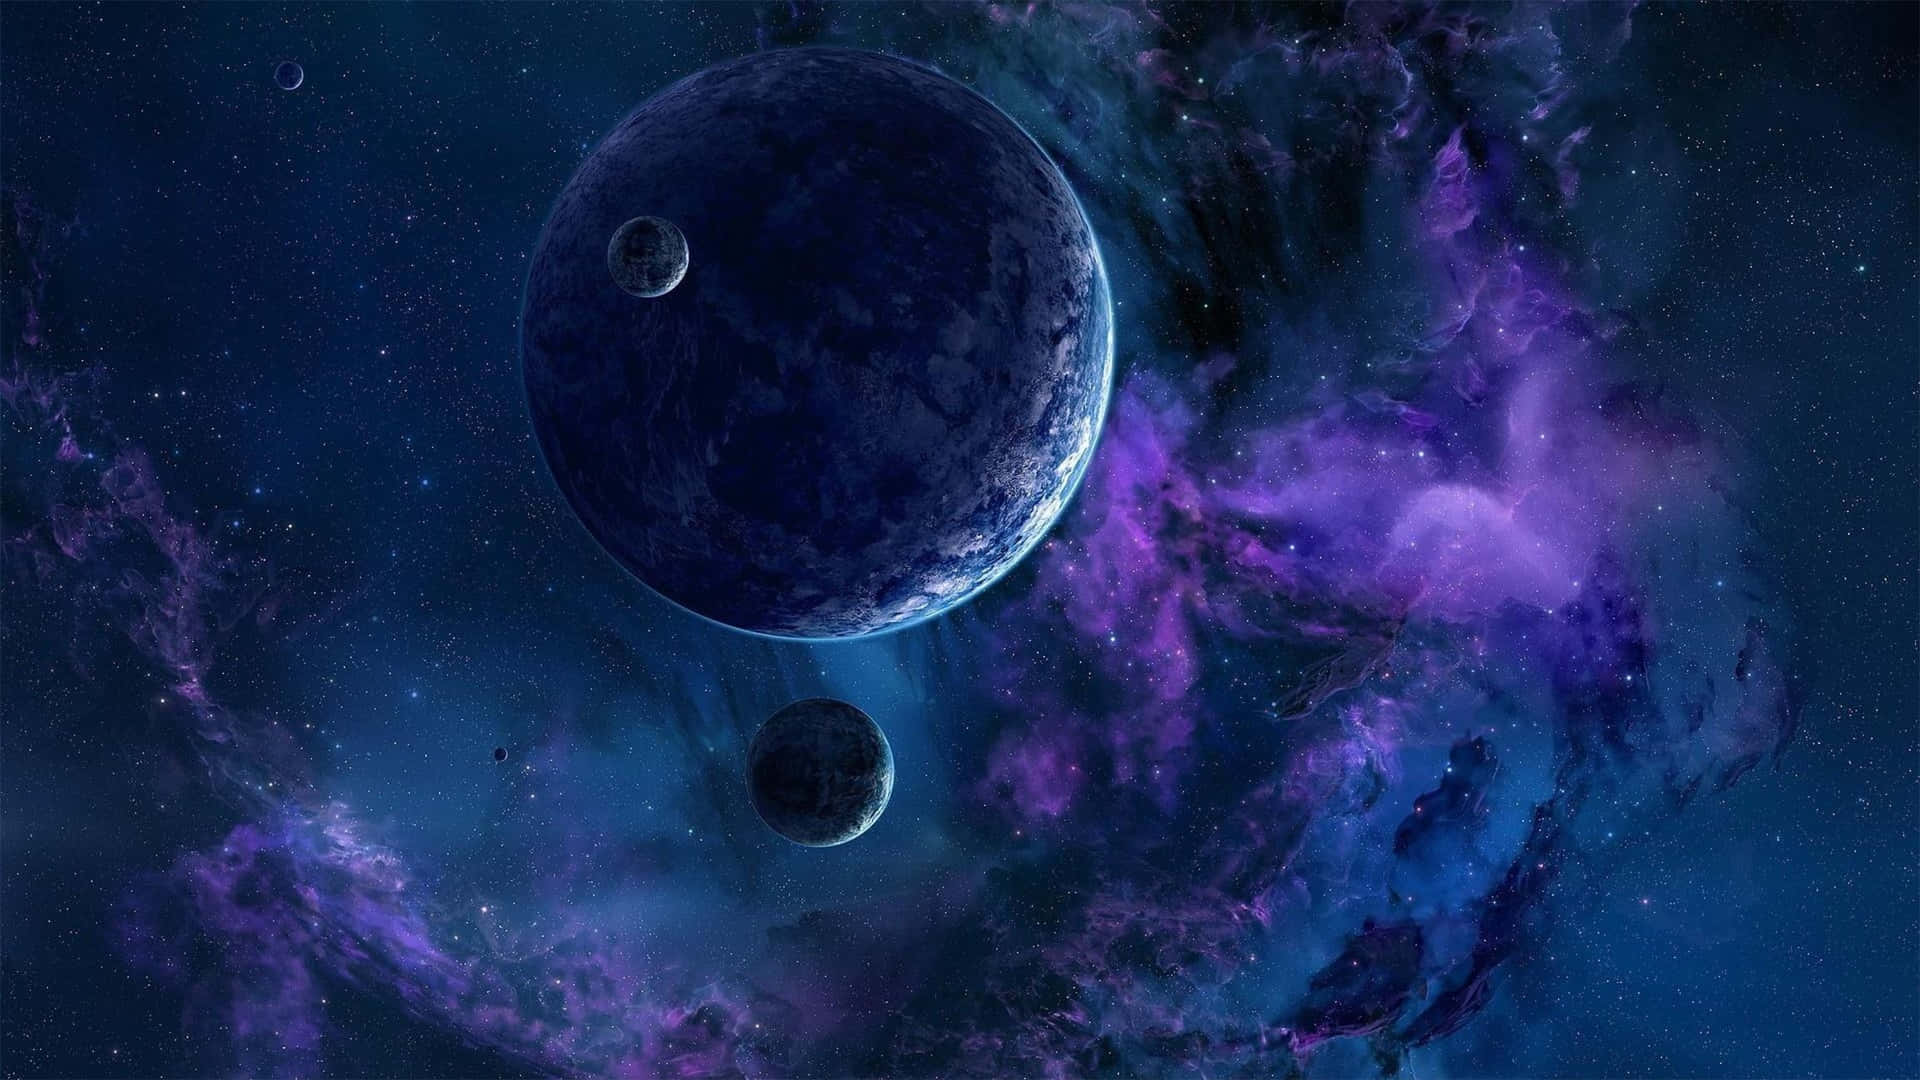 Complimentary Planets Wallpaper